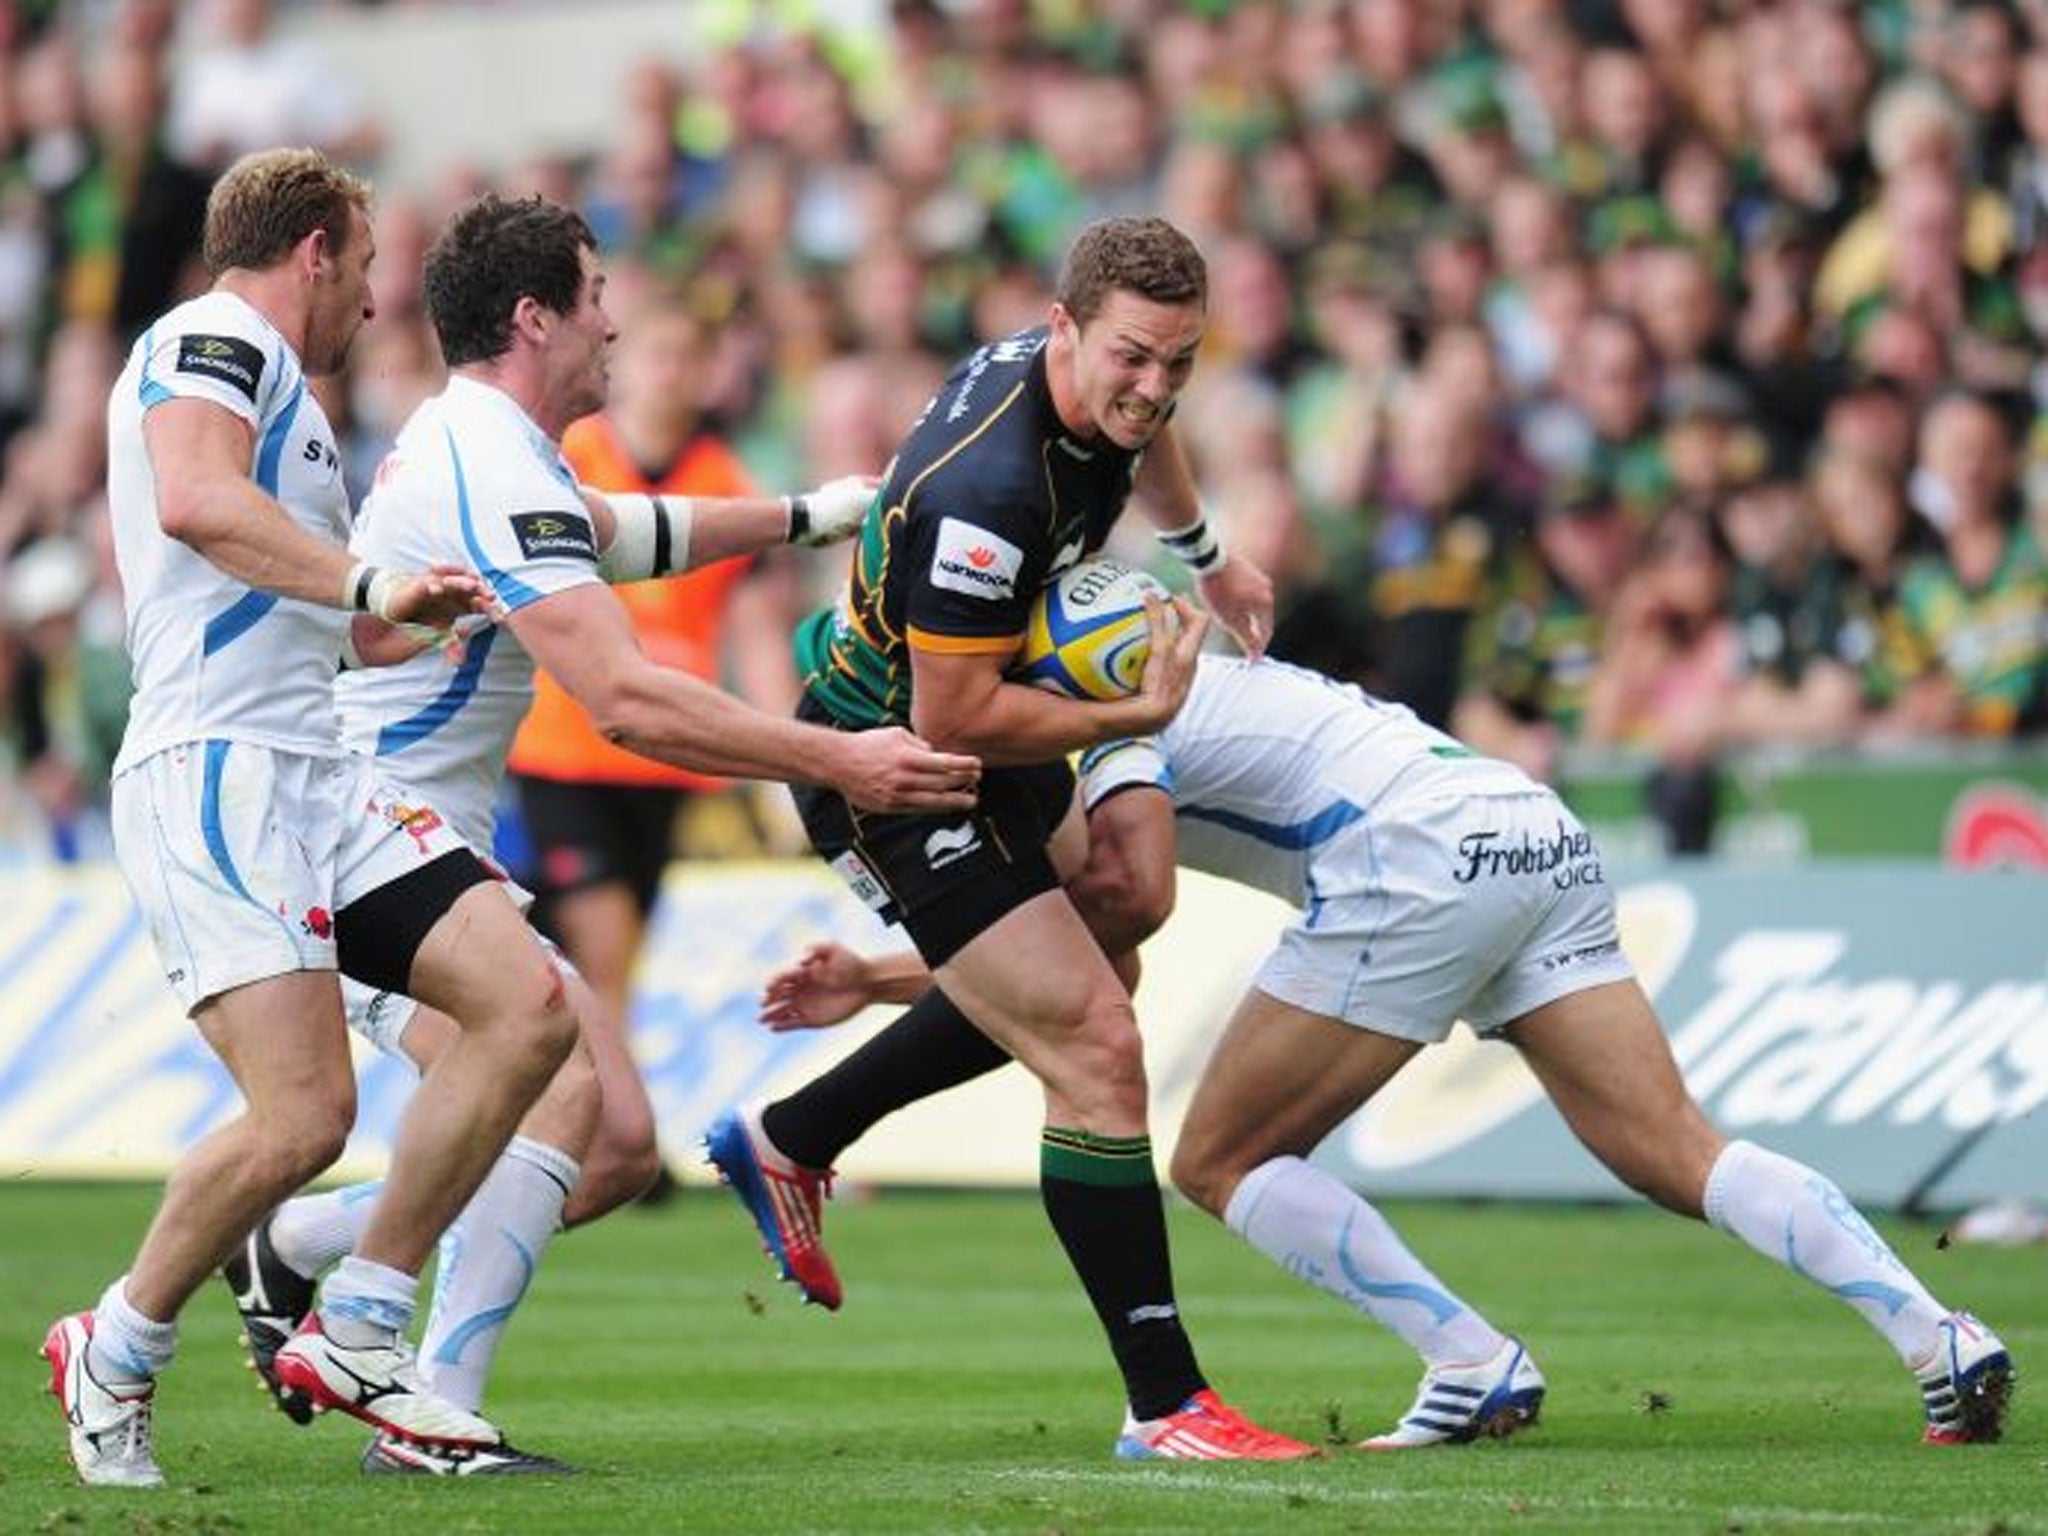 One direction: Northampton Saints winger George North barges his way through the Exeter defence